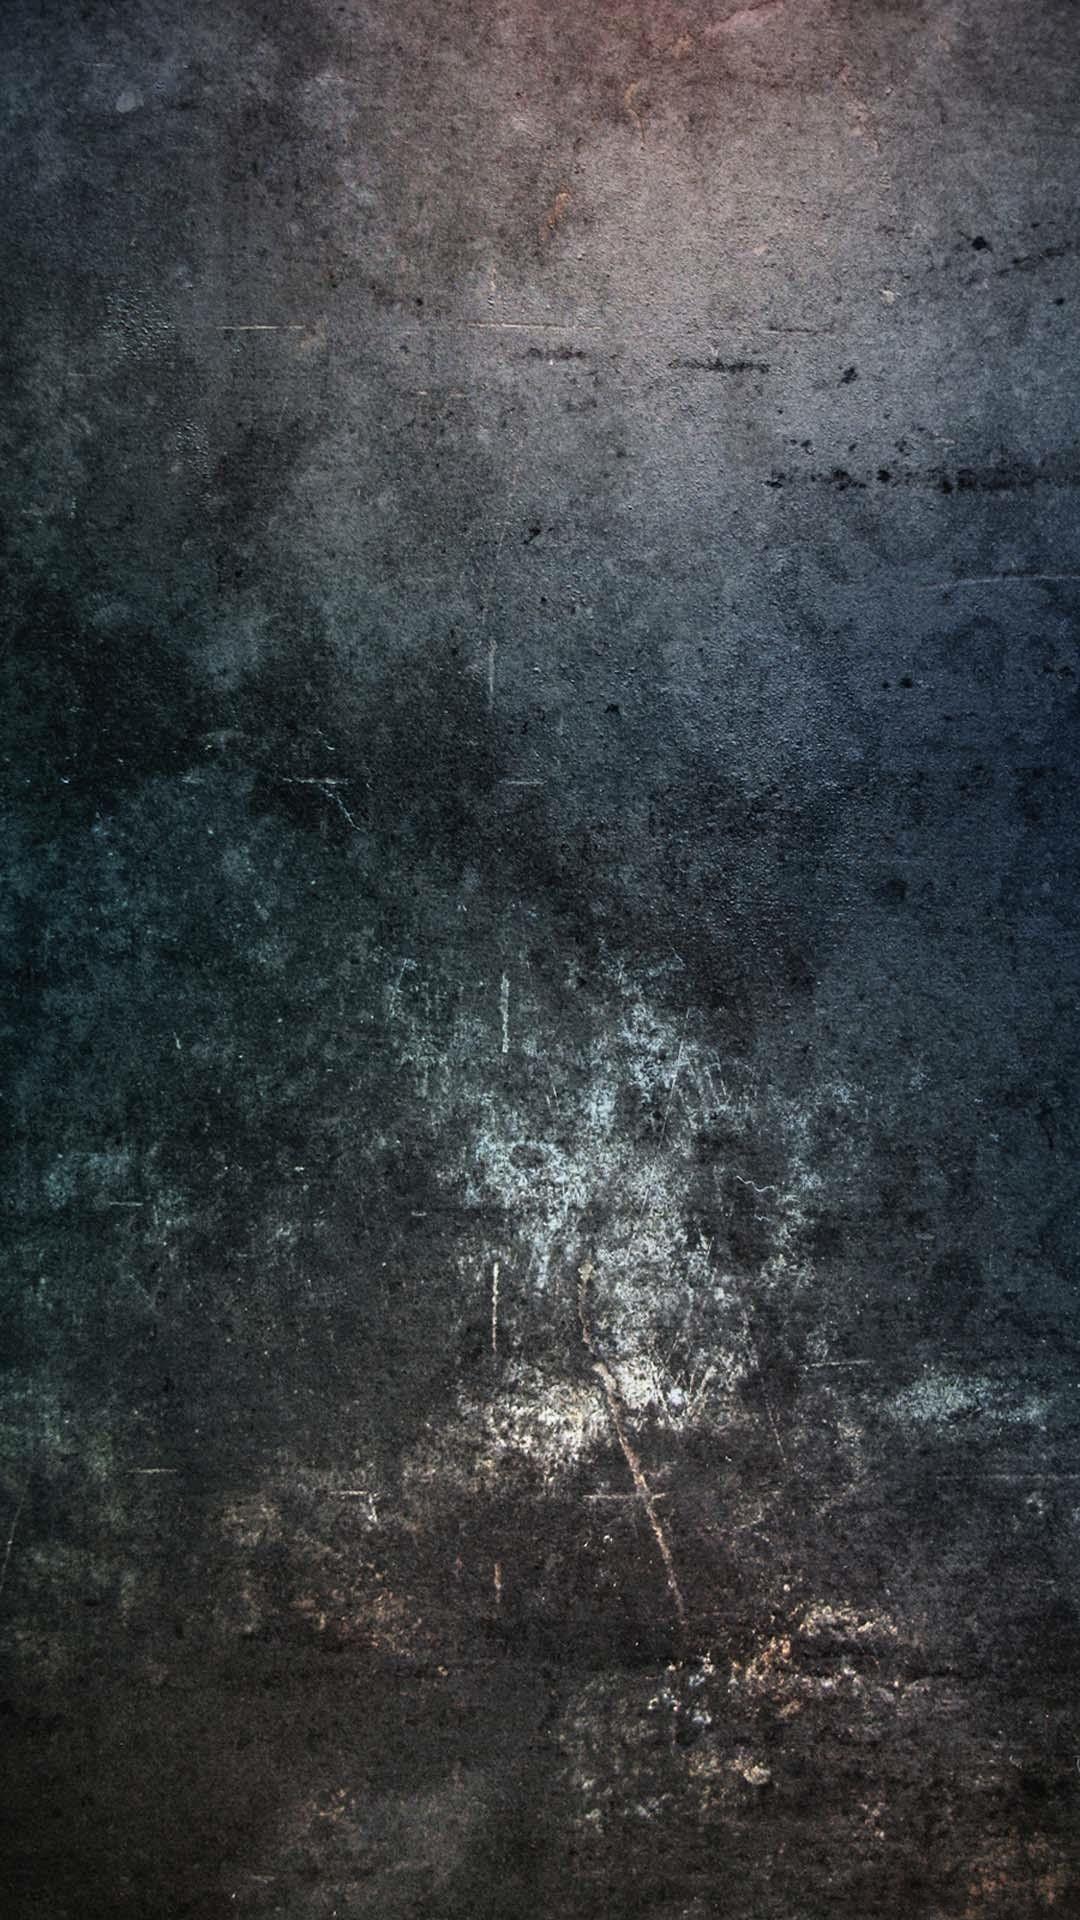 Dark Rocks Texture iPhone Wallpaper. Tap to see more iPhone 6